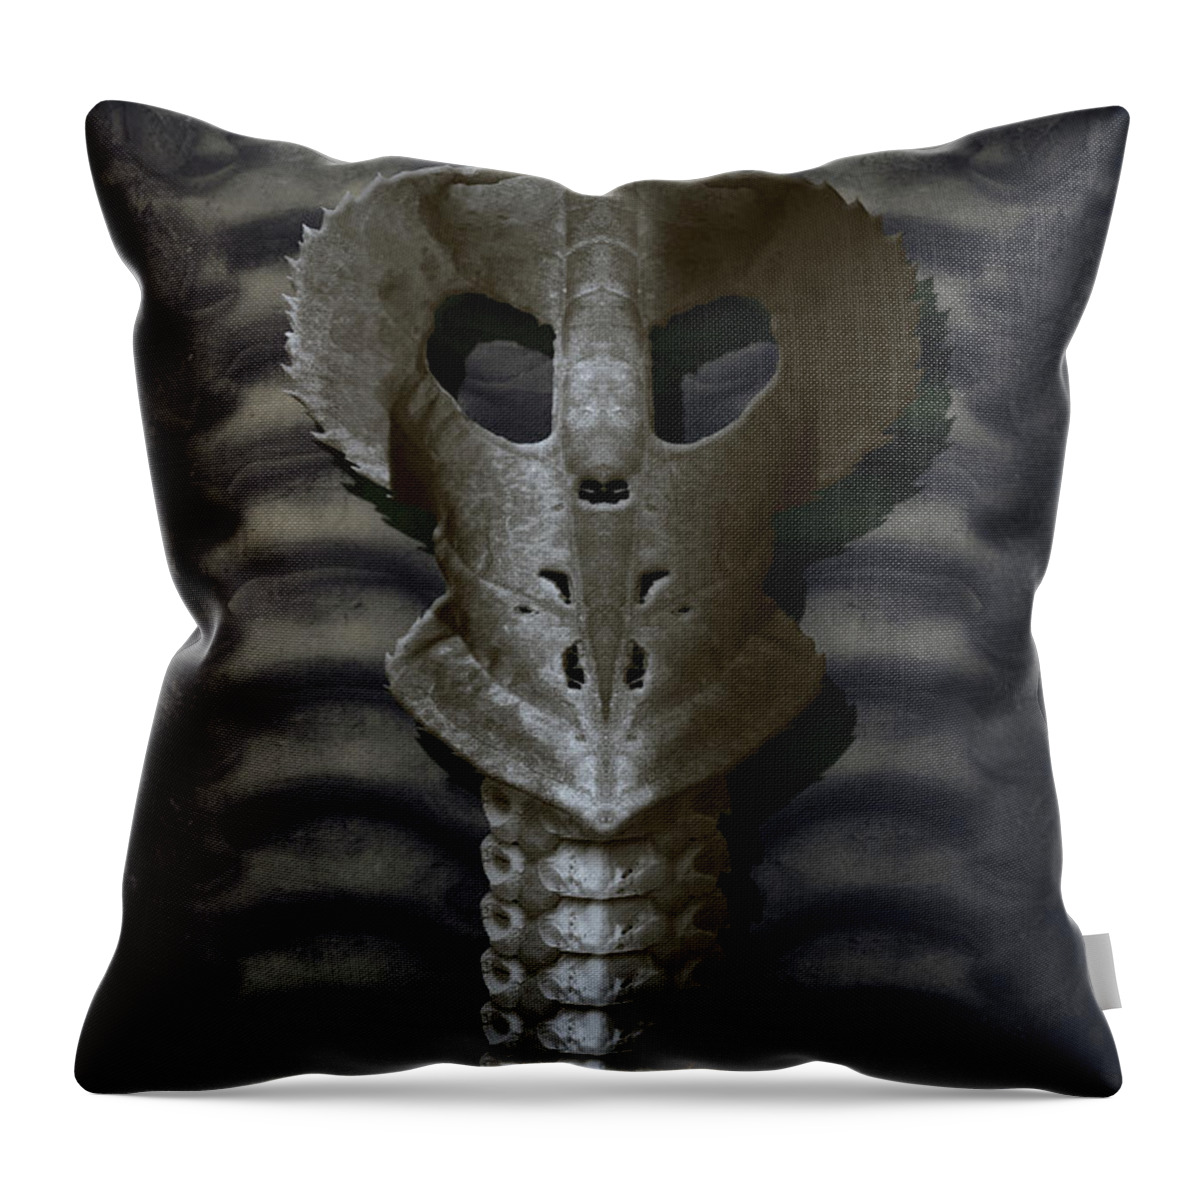 Silence Throw Pillow featuring the digital art Silence Deux by WB Johnston